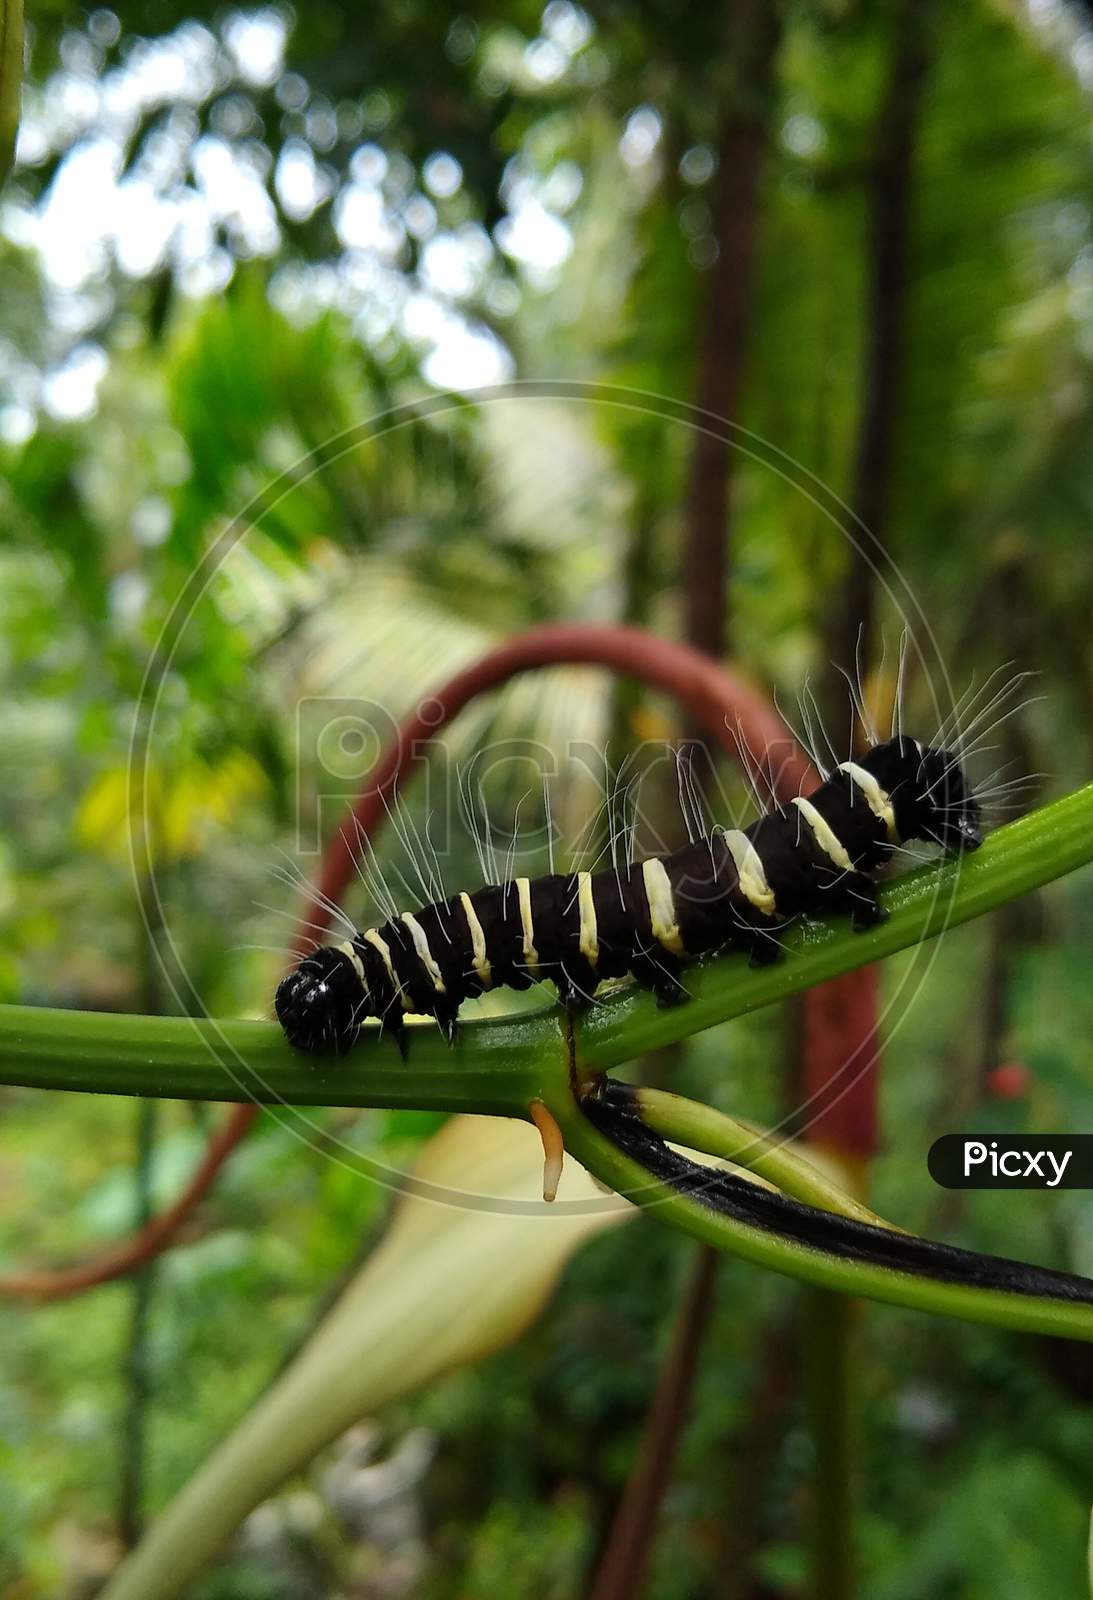 Black and yellow striped caterpillar